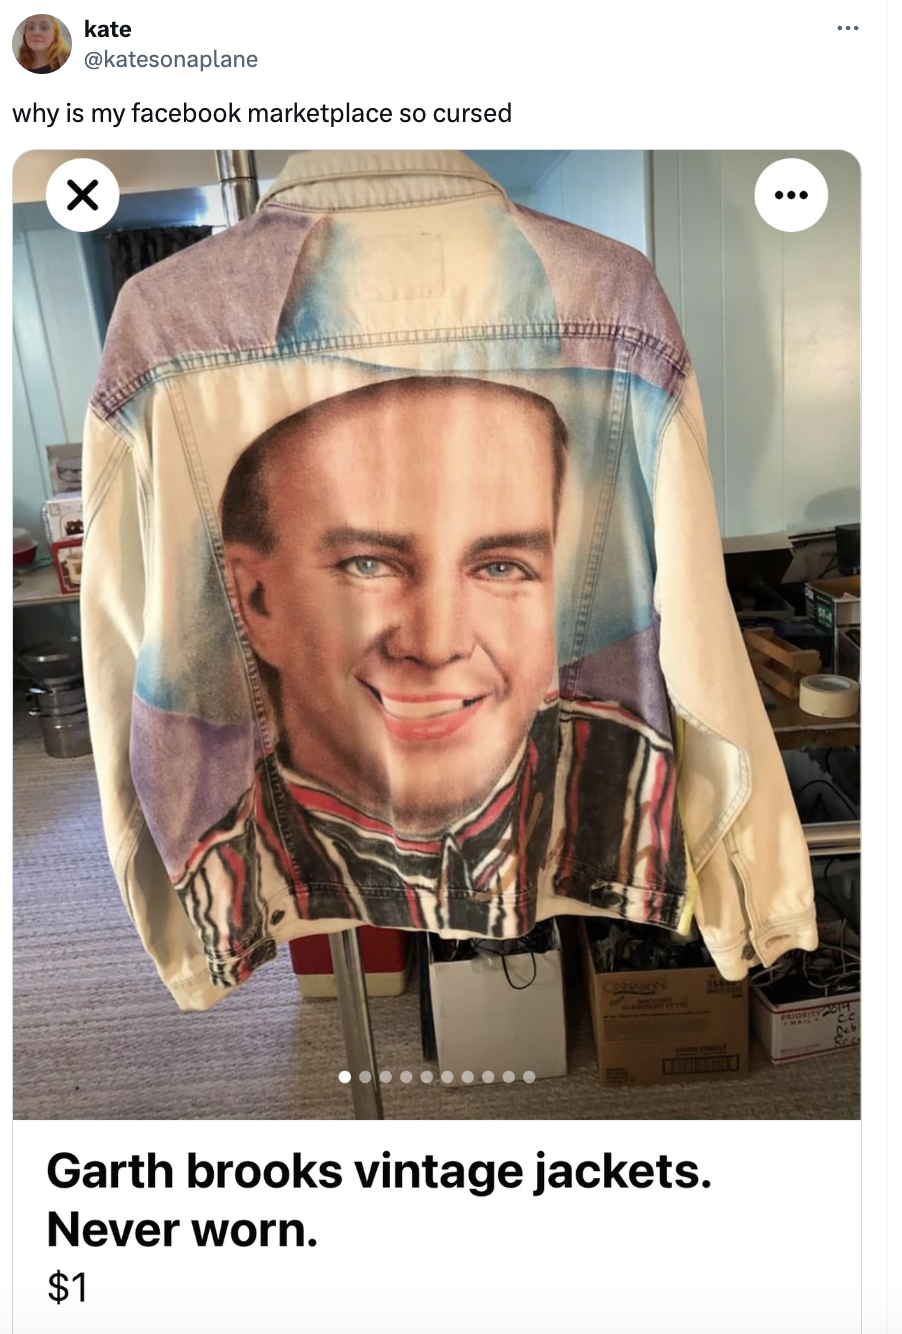 Jacket with a large printed face on the back, displayed for sale. The post is a humorous share on a social platform